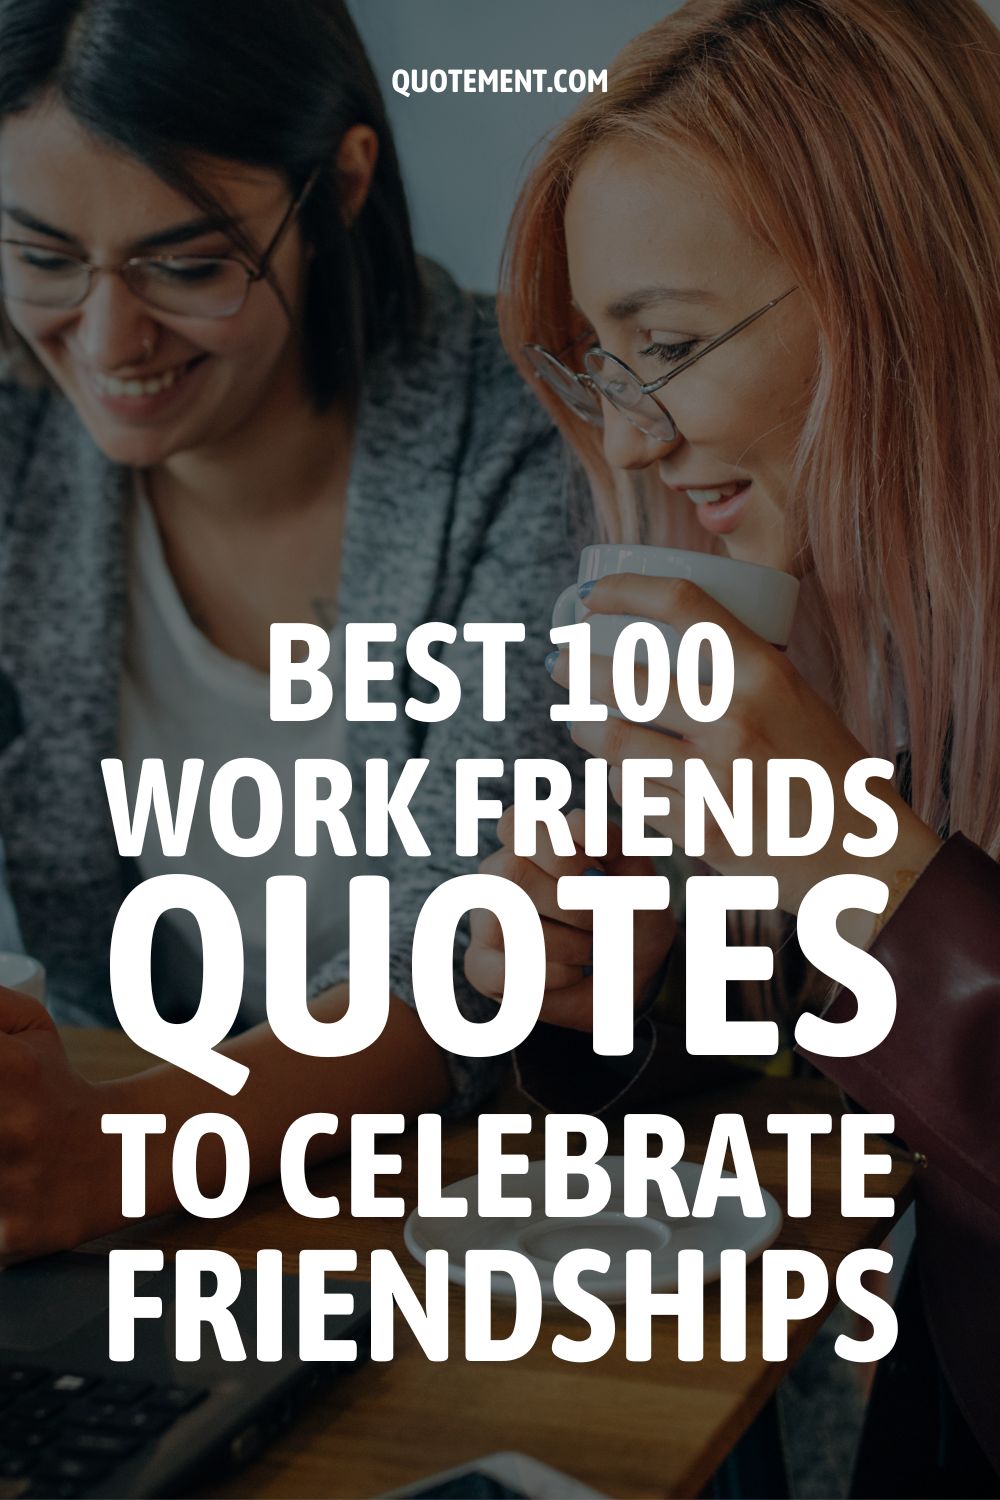 Best 100 Work Friends Quotes To Celebrate Friendships
